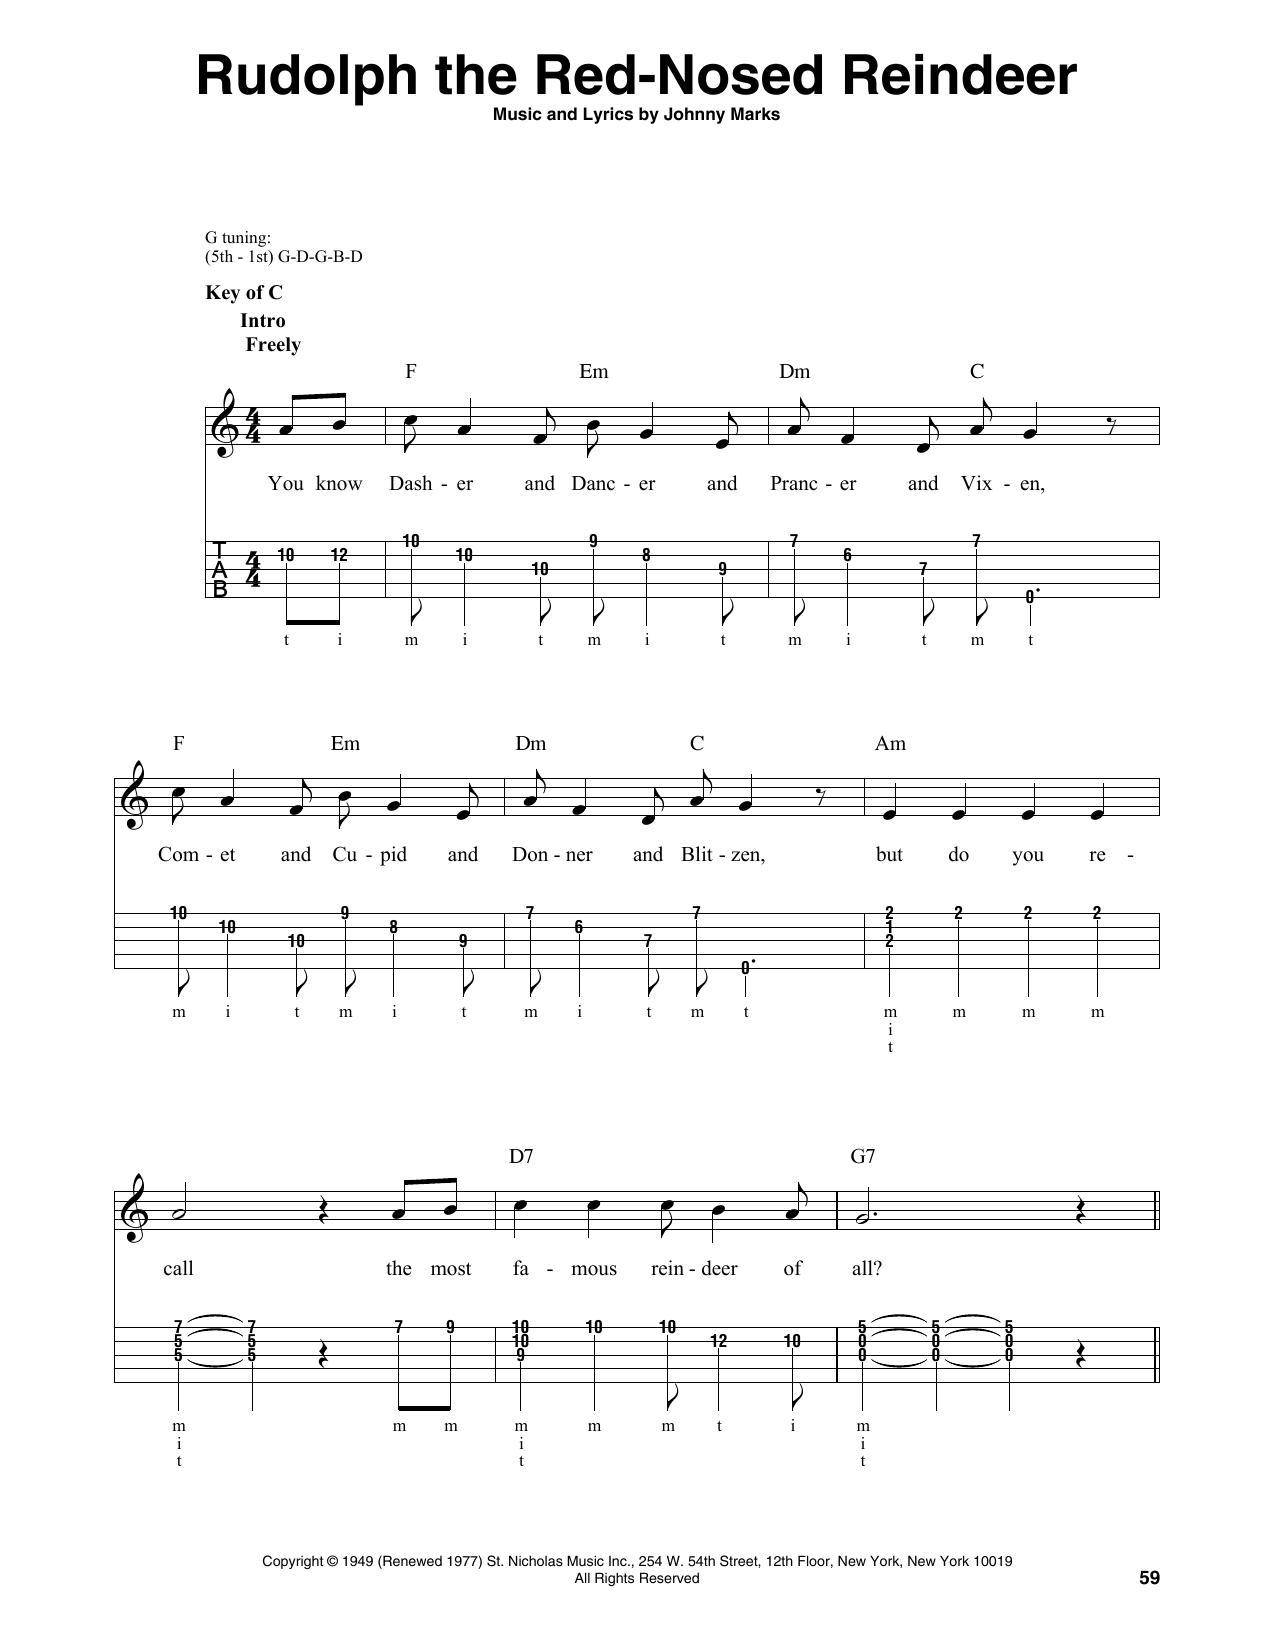 Rudolph The Red-Nosed Reindeer (Banjo Tab) von Johnny Marks